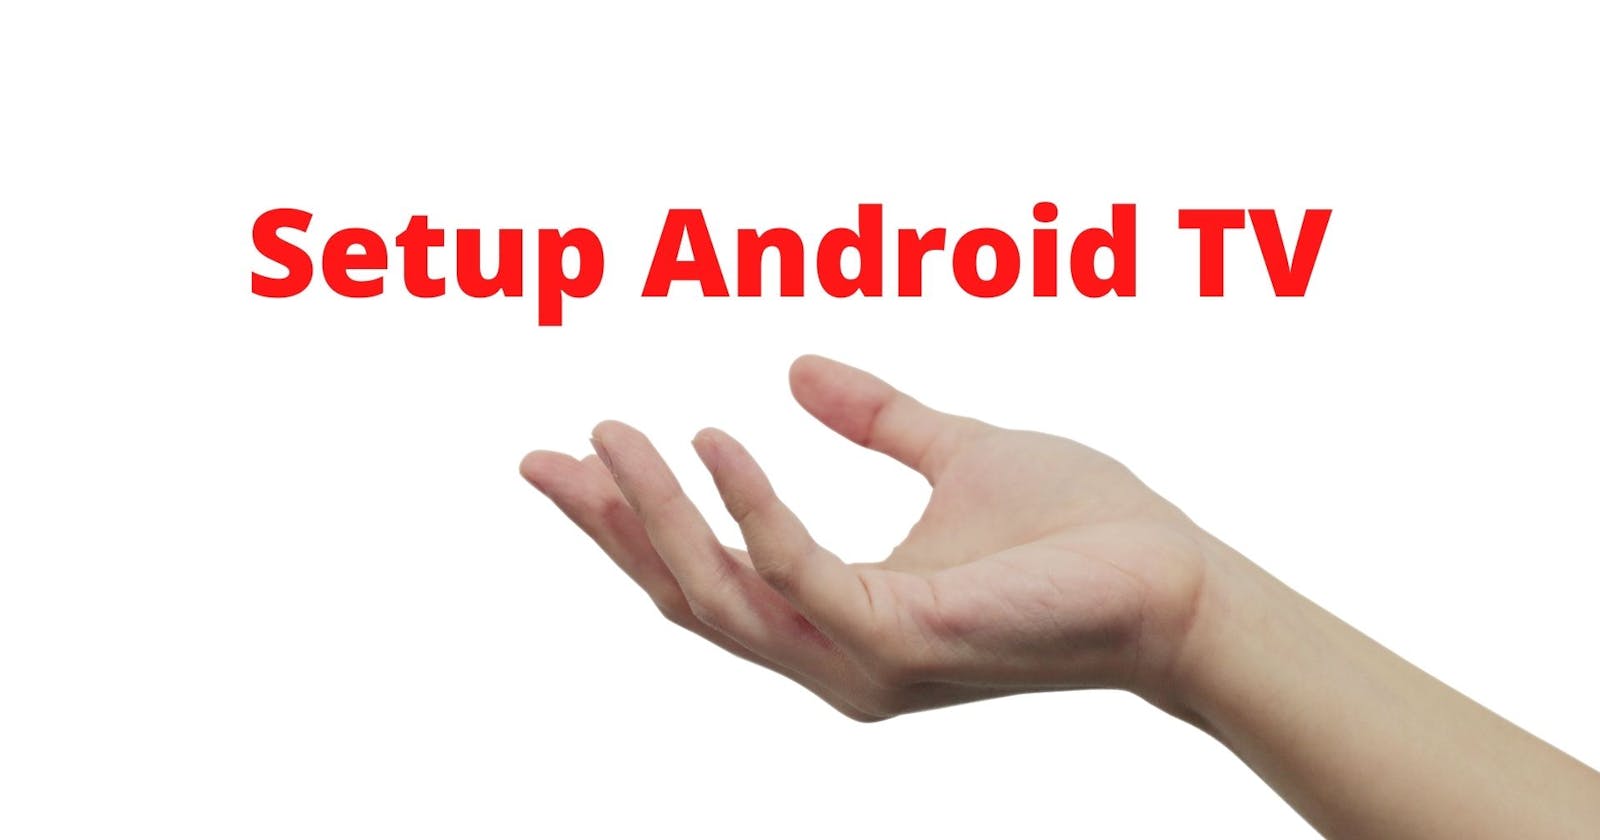 Simple Steps to Setup Android TV